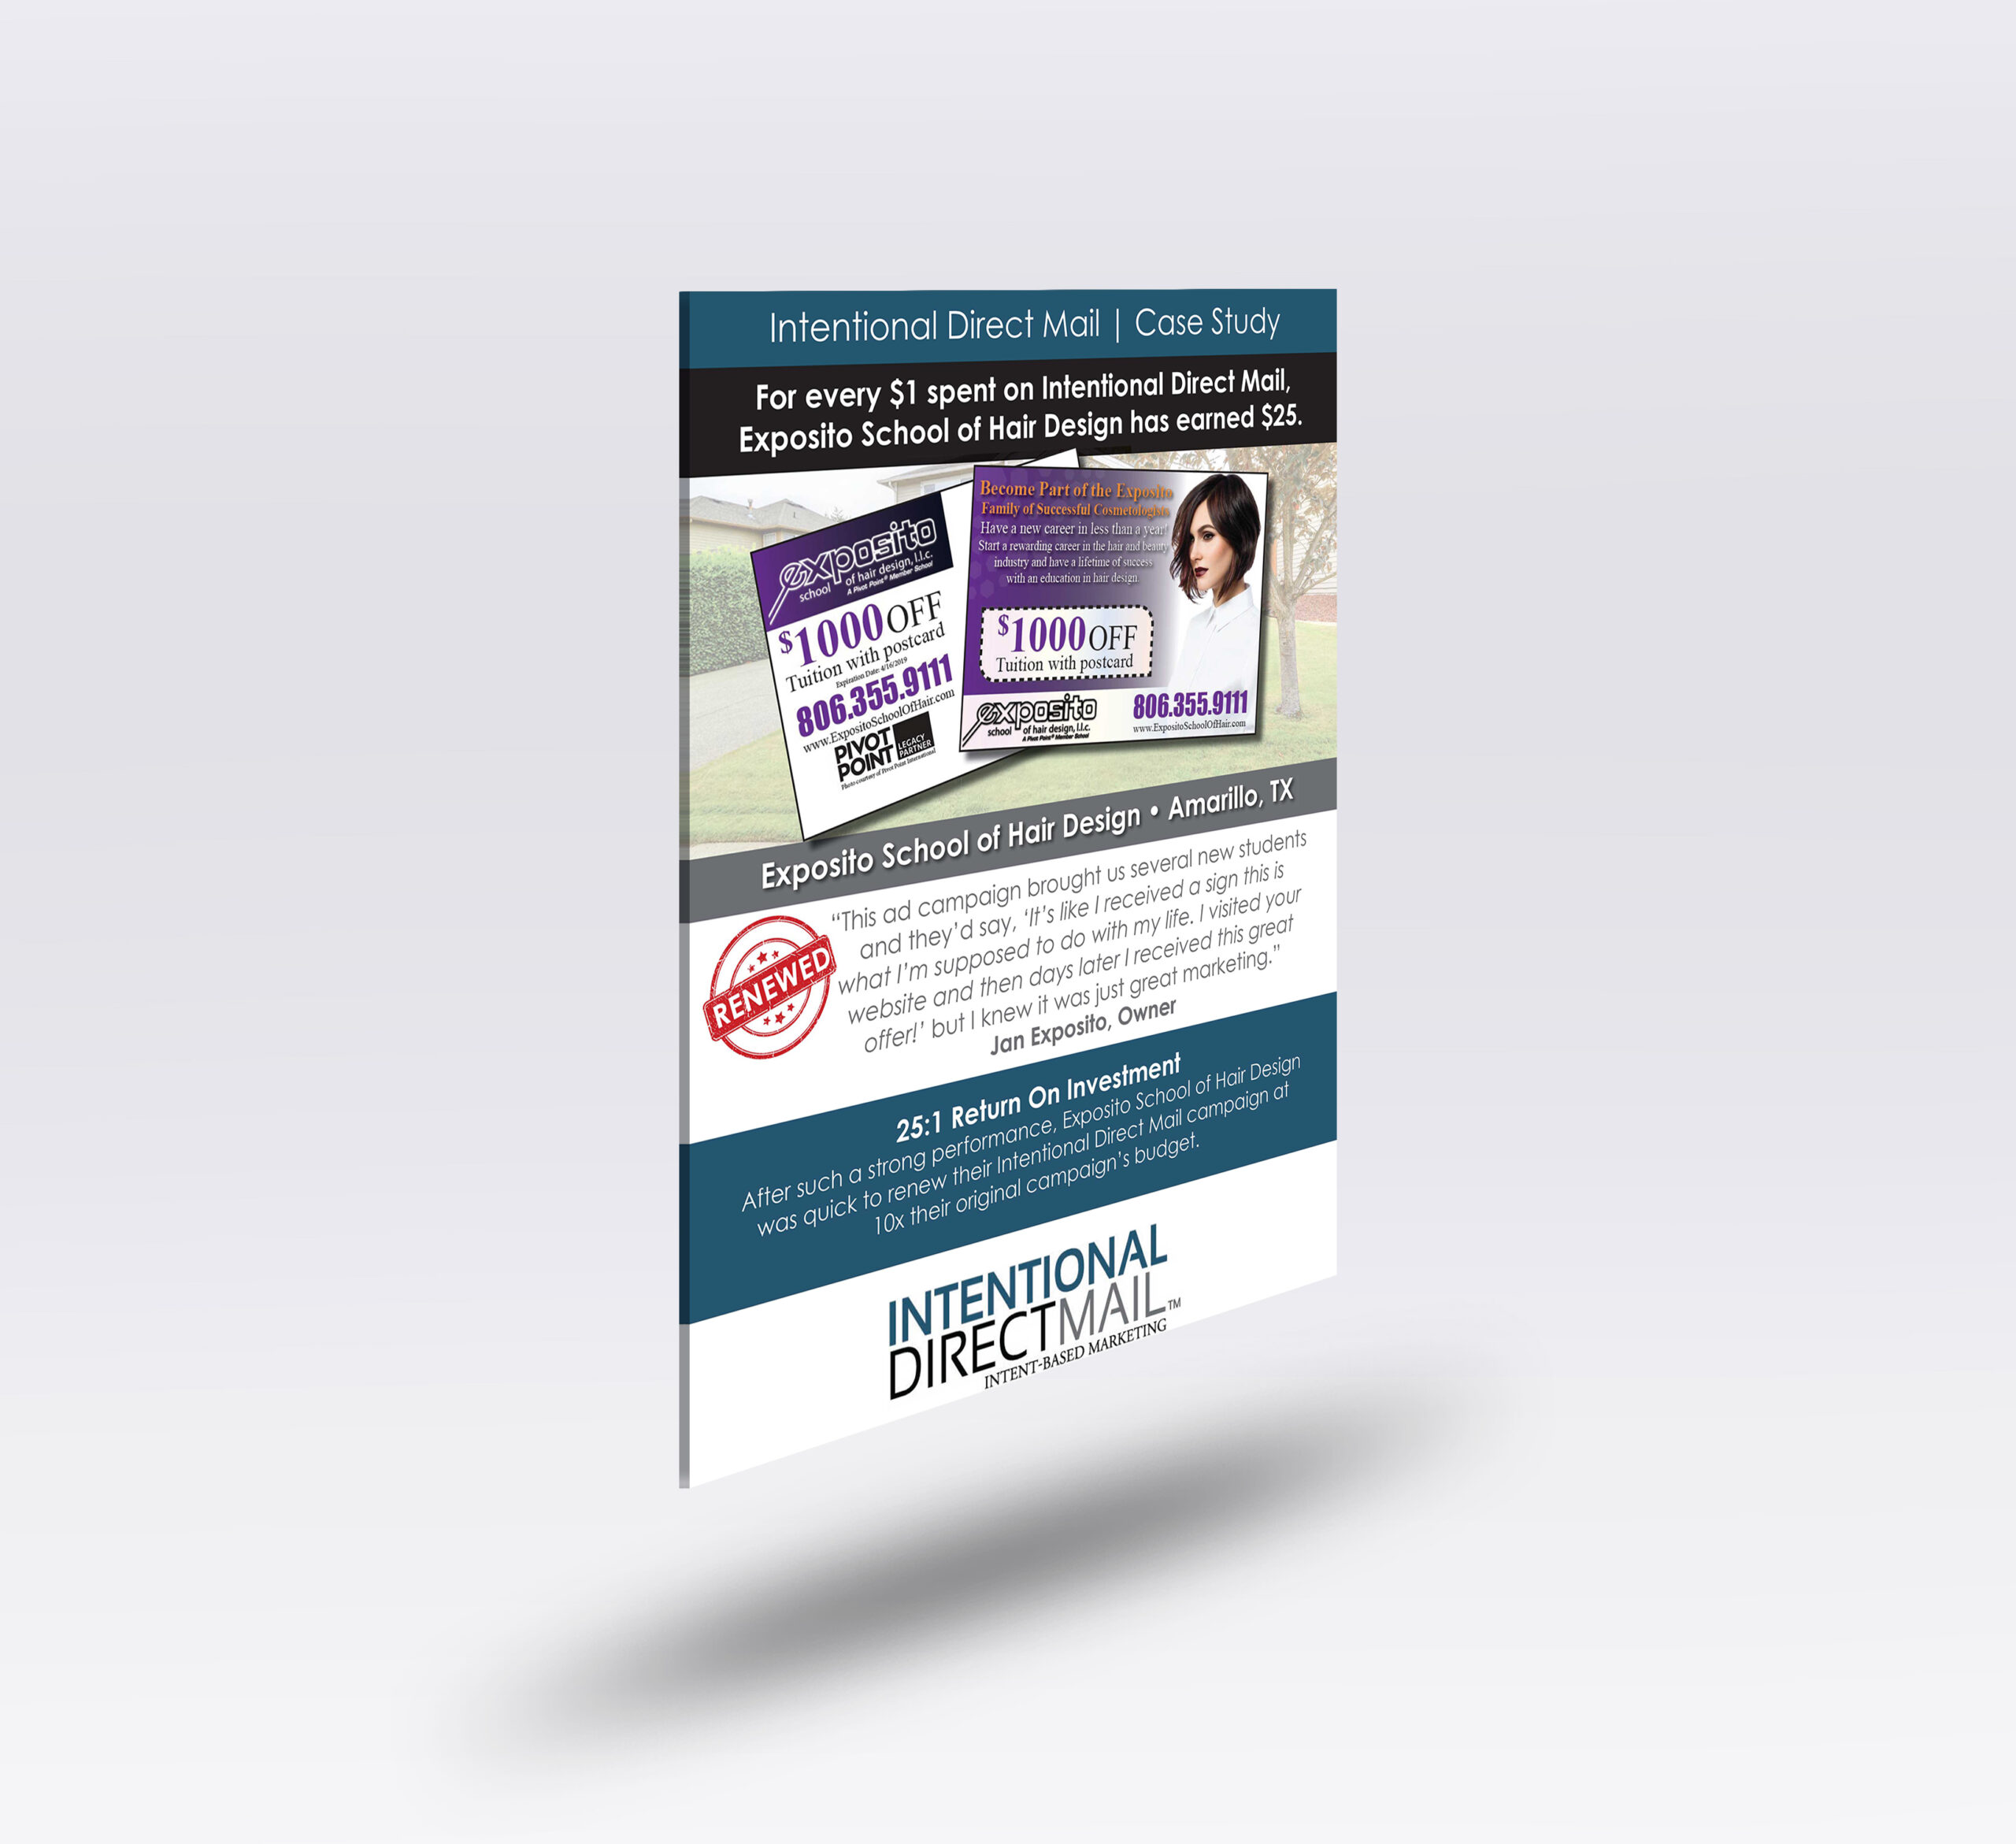 Exposito Print Mail Design - Brand and Web Design Agency